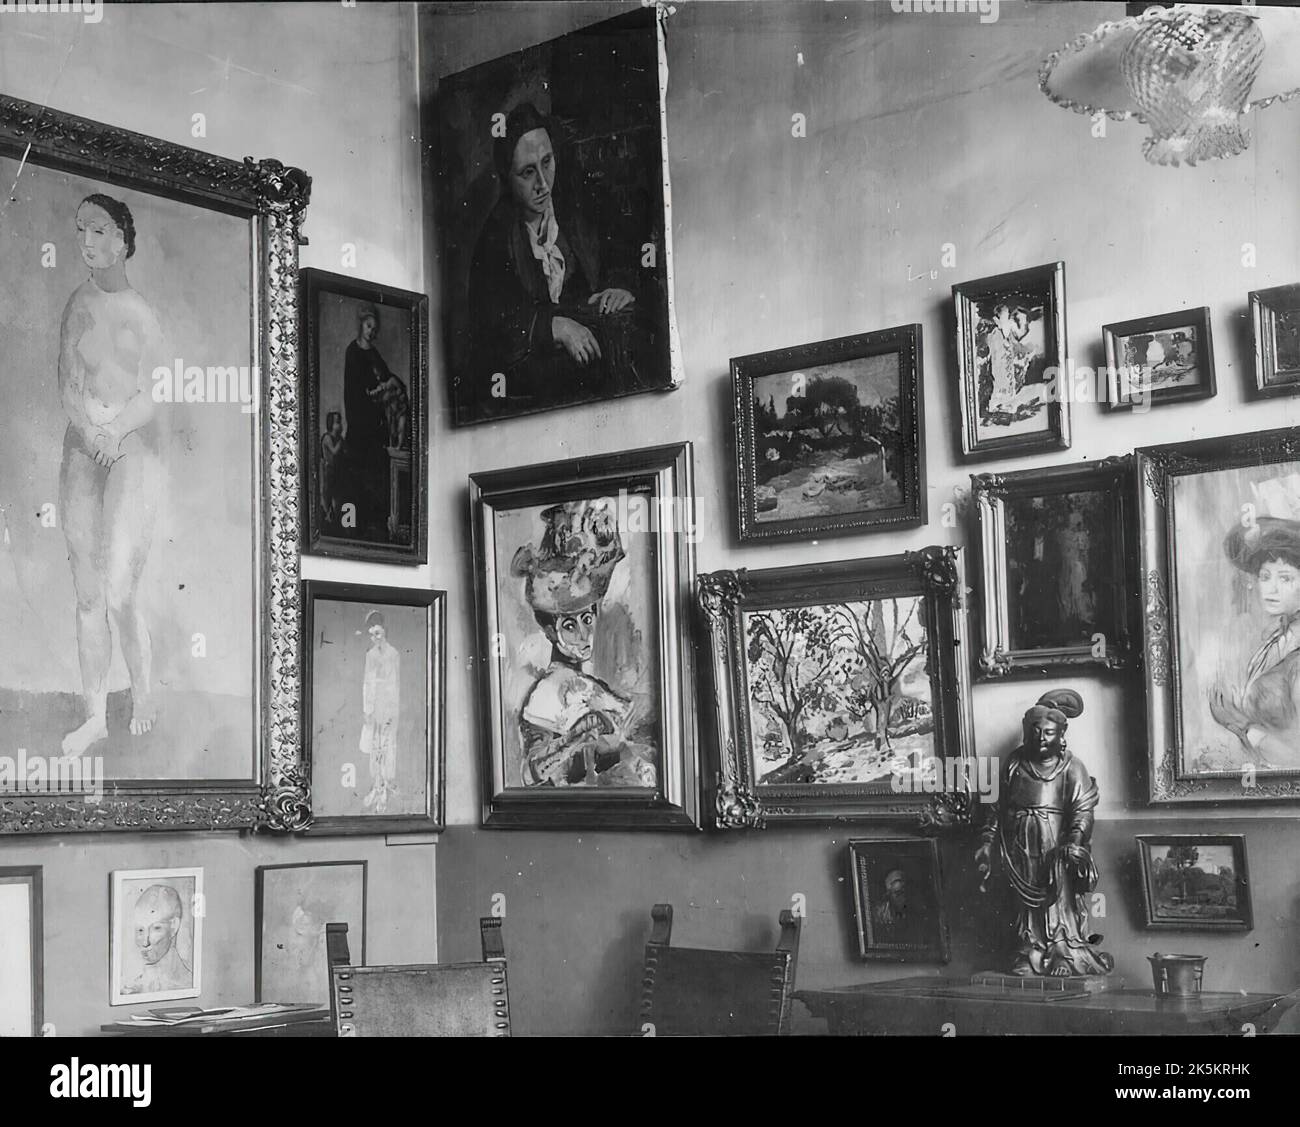 Picasso portrait of Gertrude Stein before it was framed, circa 1907. Photographs from the Annette Rosenshine papers. Museum: The Bancroft Library, BERKELEY, USA. Stock Photo